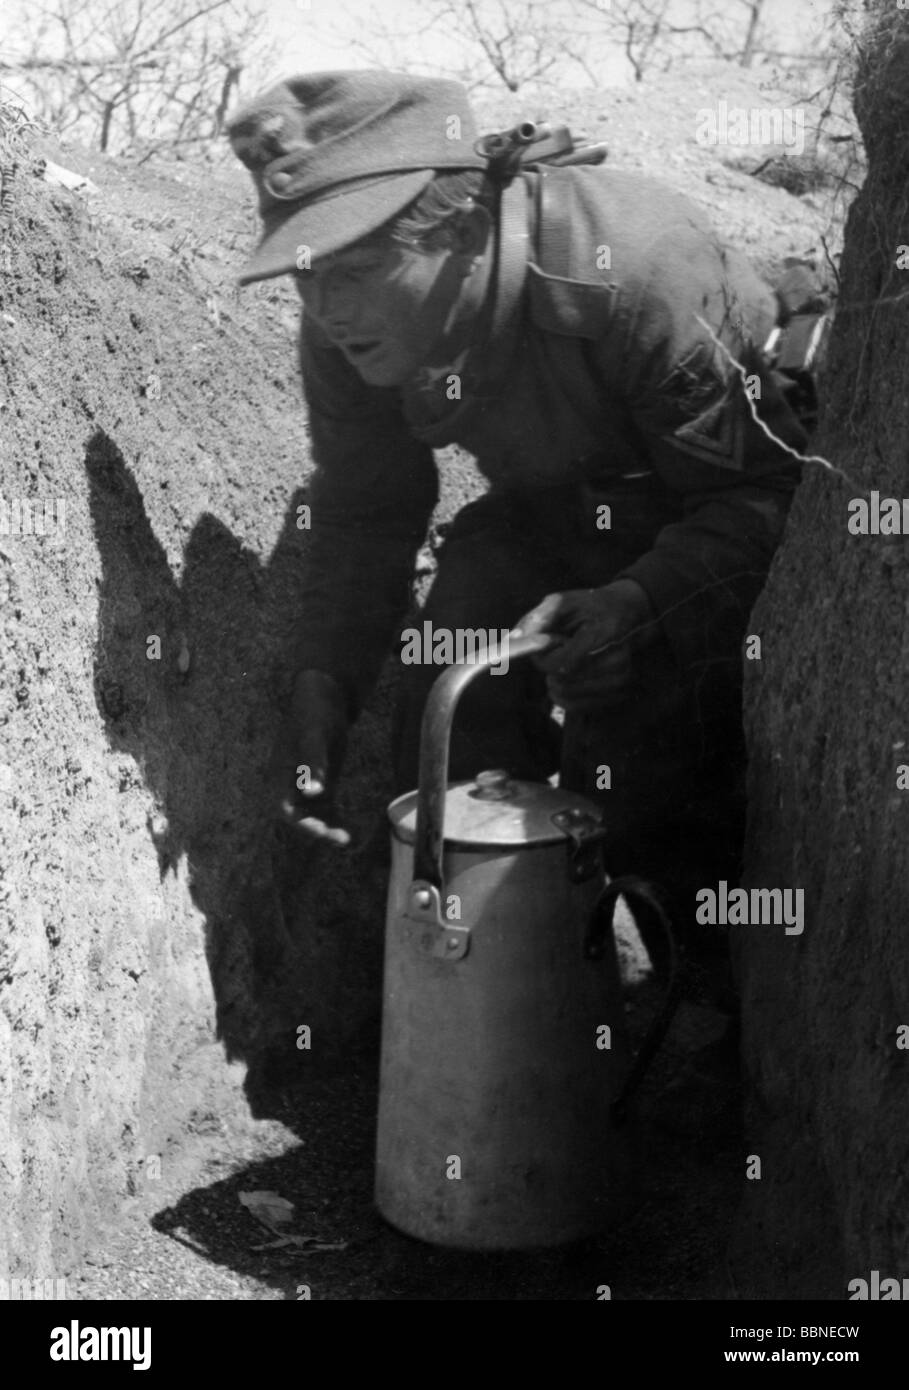 events, Second World War / WWII, Russia 1944 / 1945, Crimea, Sevastopol, German soldier bringing food to his comrades in a dugout at the main front, 26.4.1944, field cap, trench, Eastern Front, USSR, Wehrmacht, 20th century, historic, historical, uniform, uniforms, infantry, Obergefreiter, can, pot, people, 1940s, Stock Photo